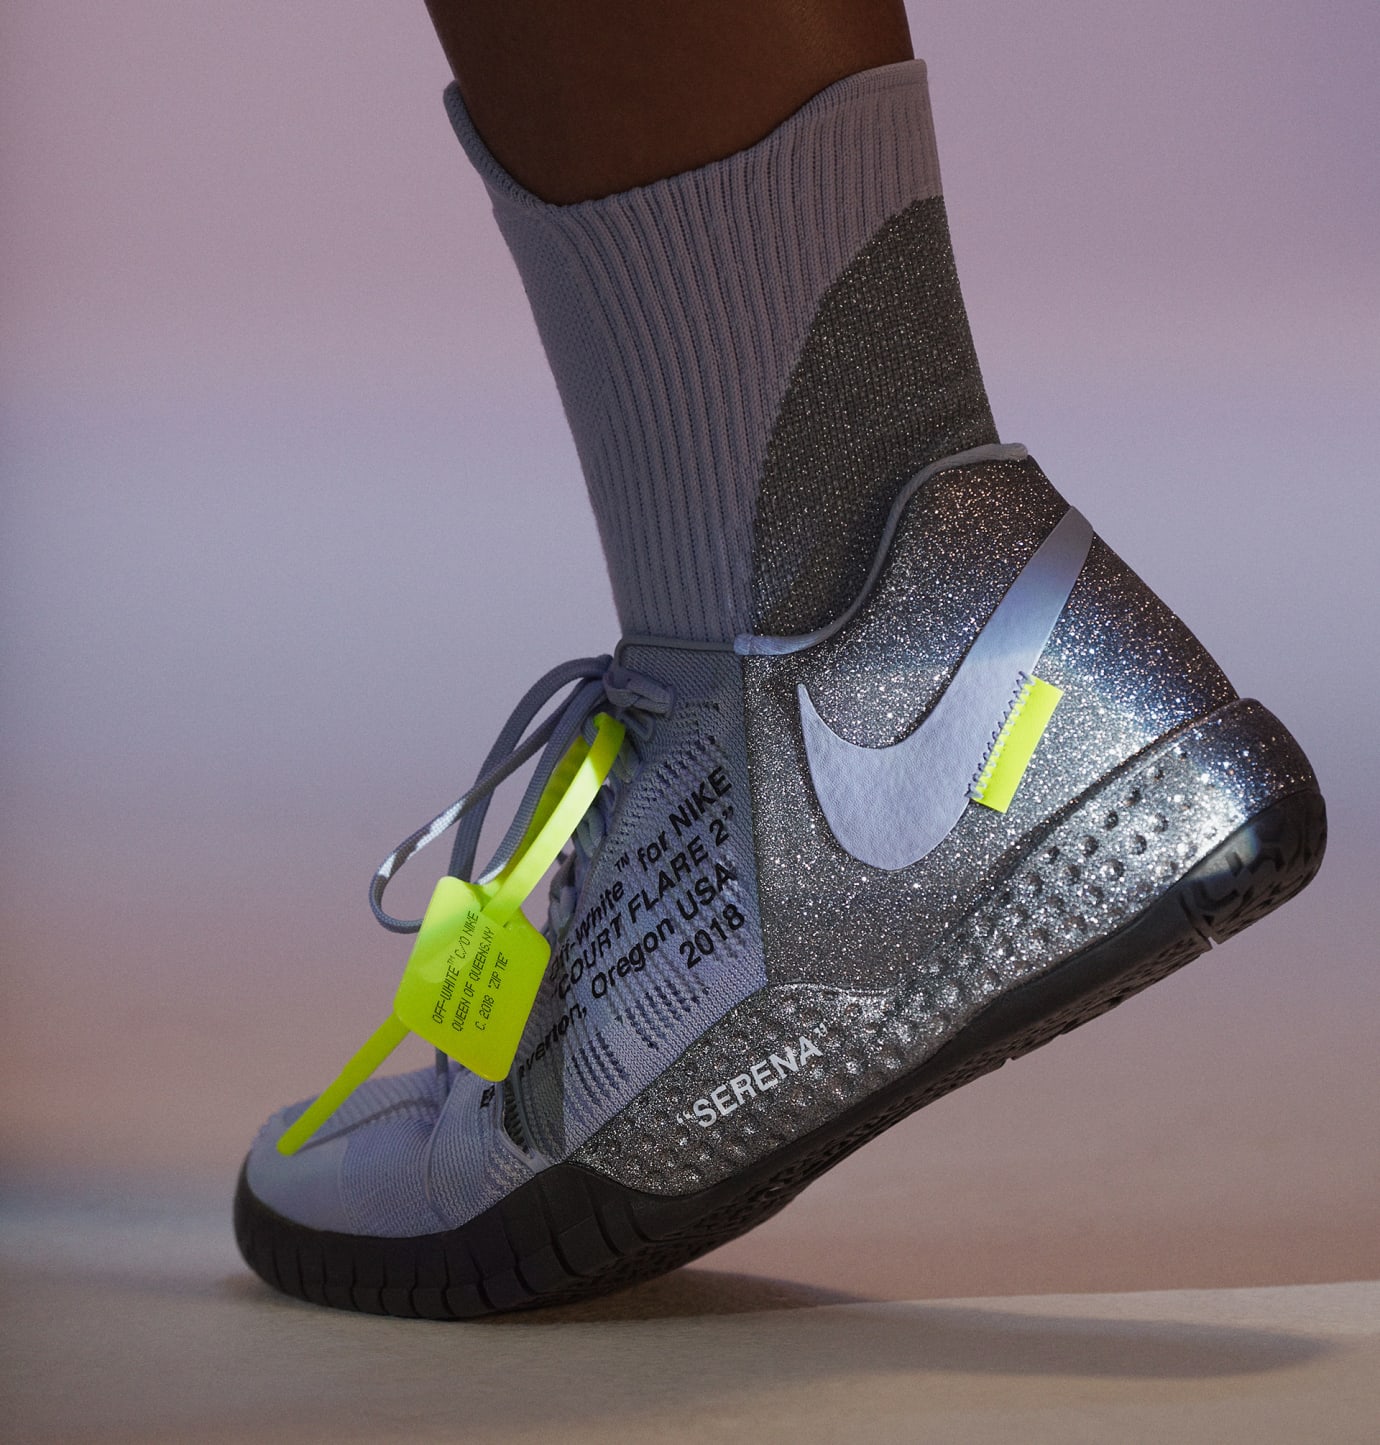 Virgil Abloh x Nike x Serena Williams Queen Collection NikeCourt Flare 2